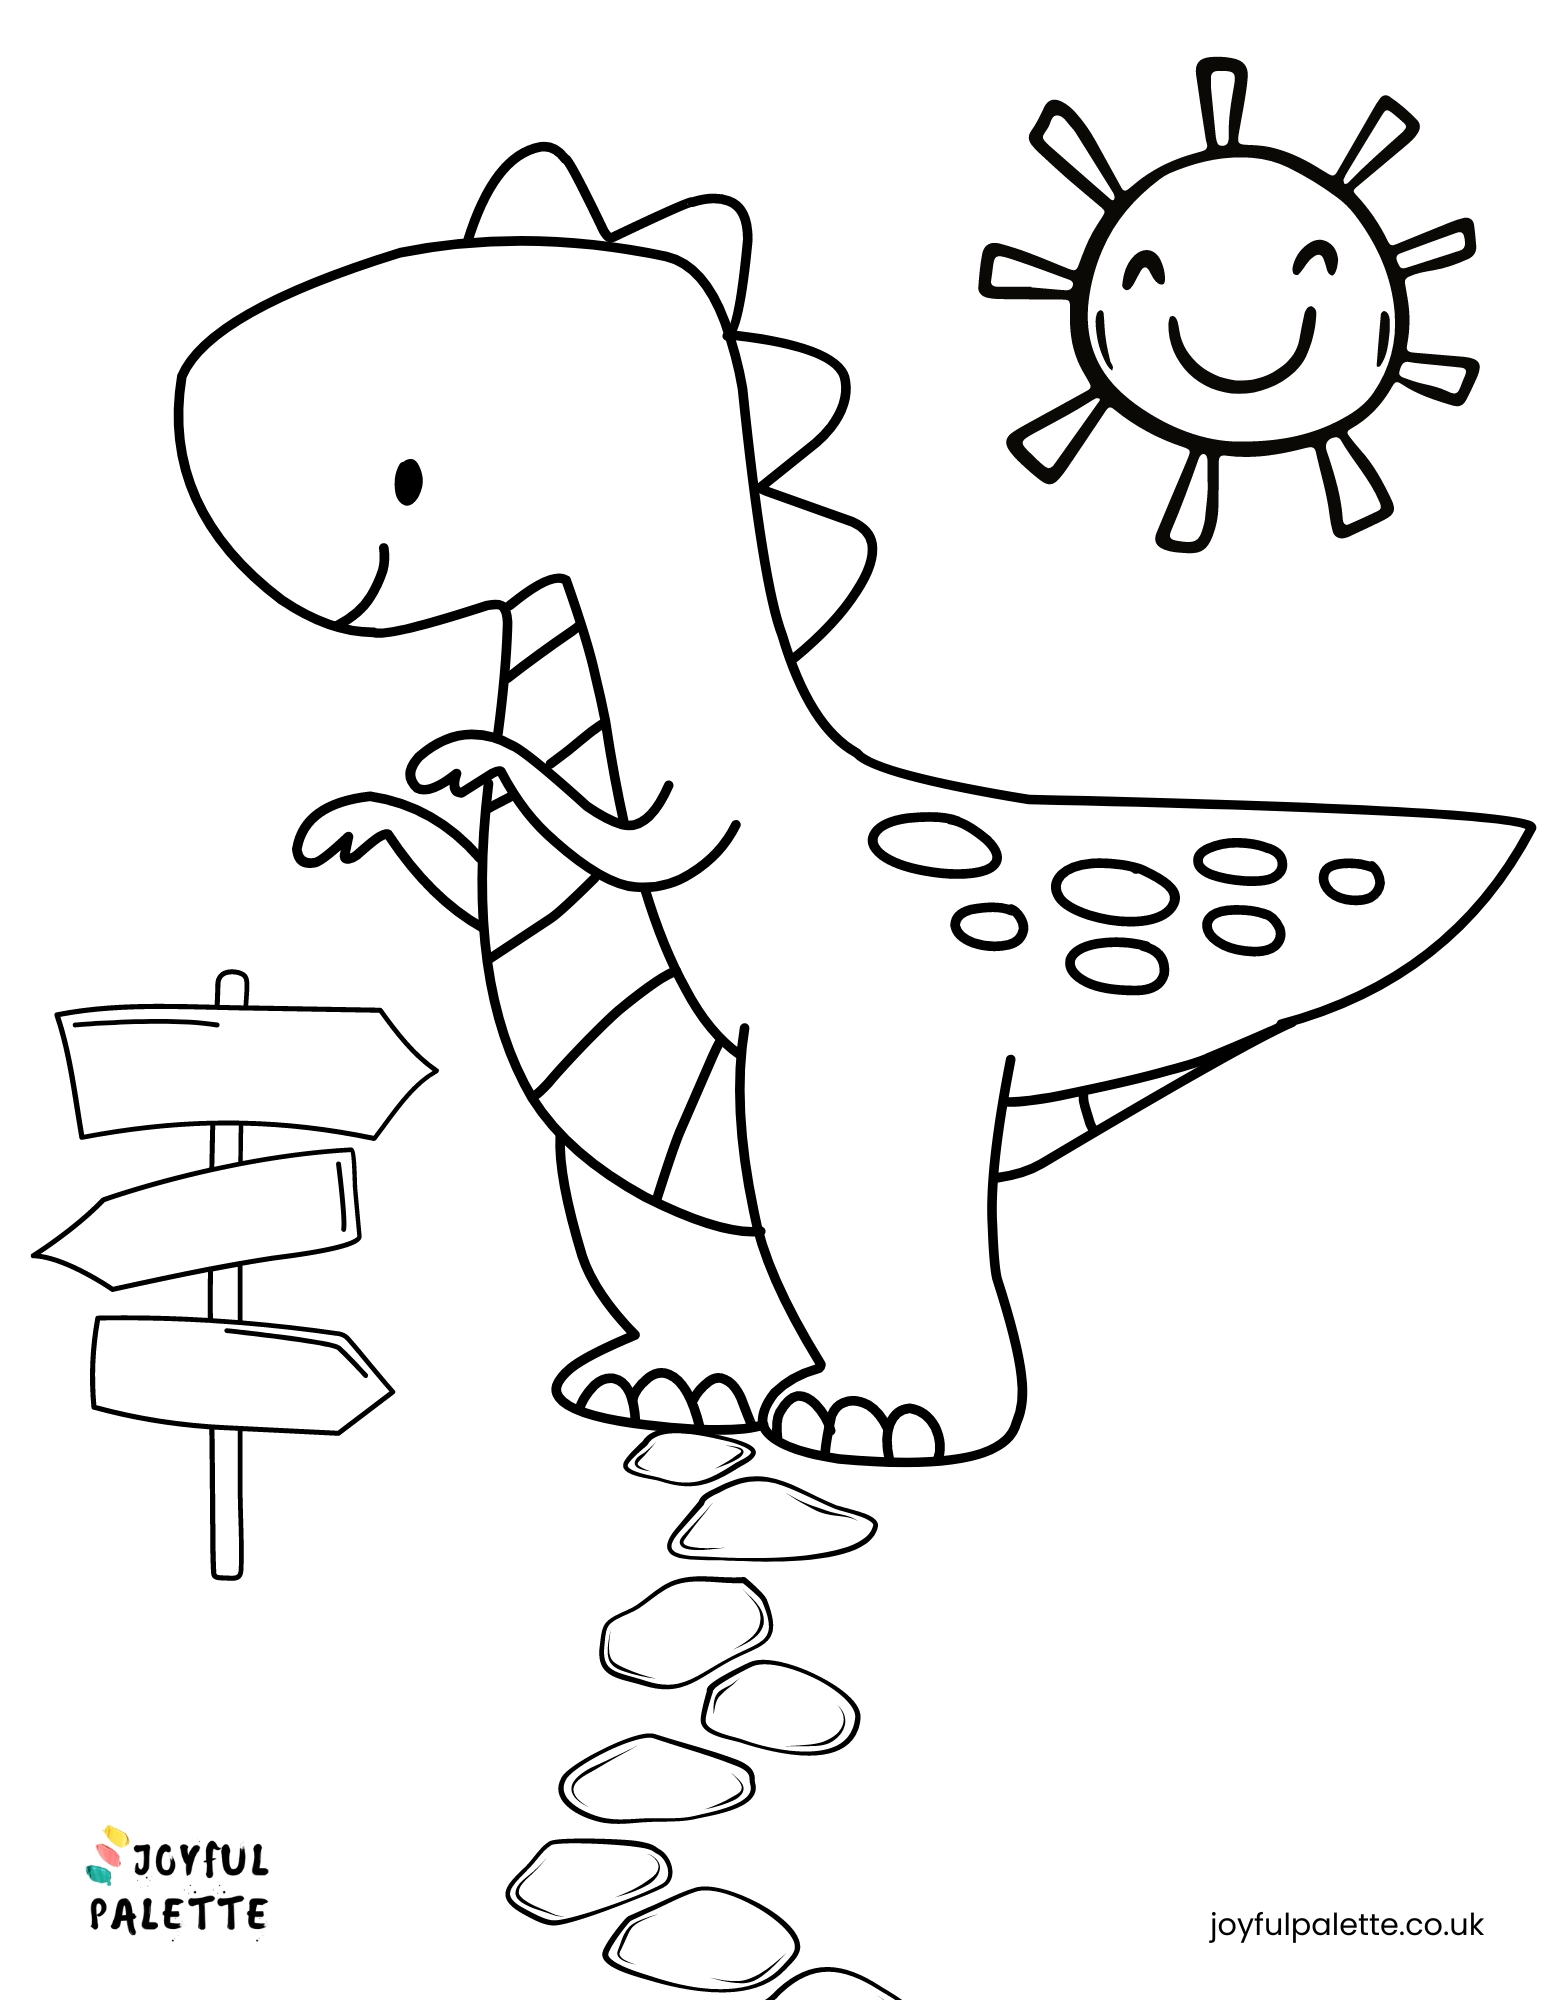 Cute Dinosaur Coloring Pages pdf